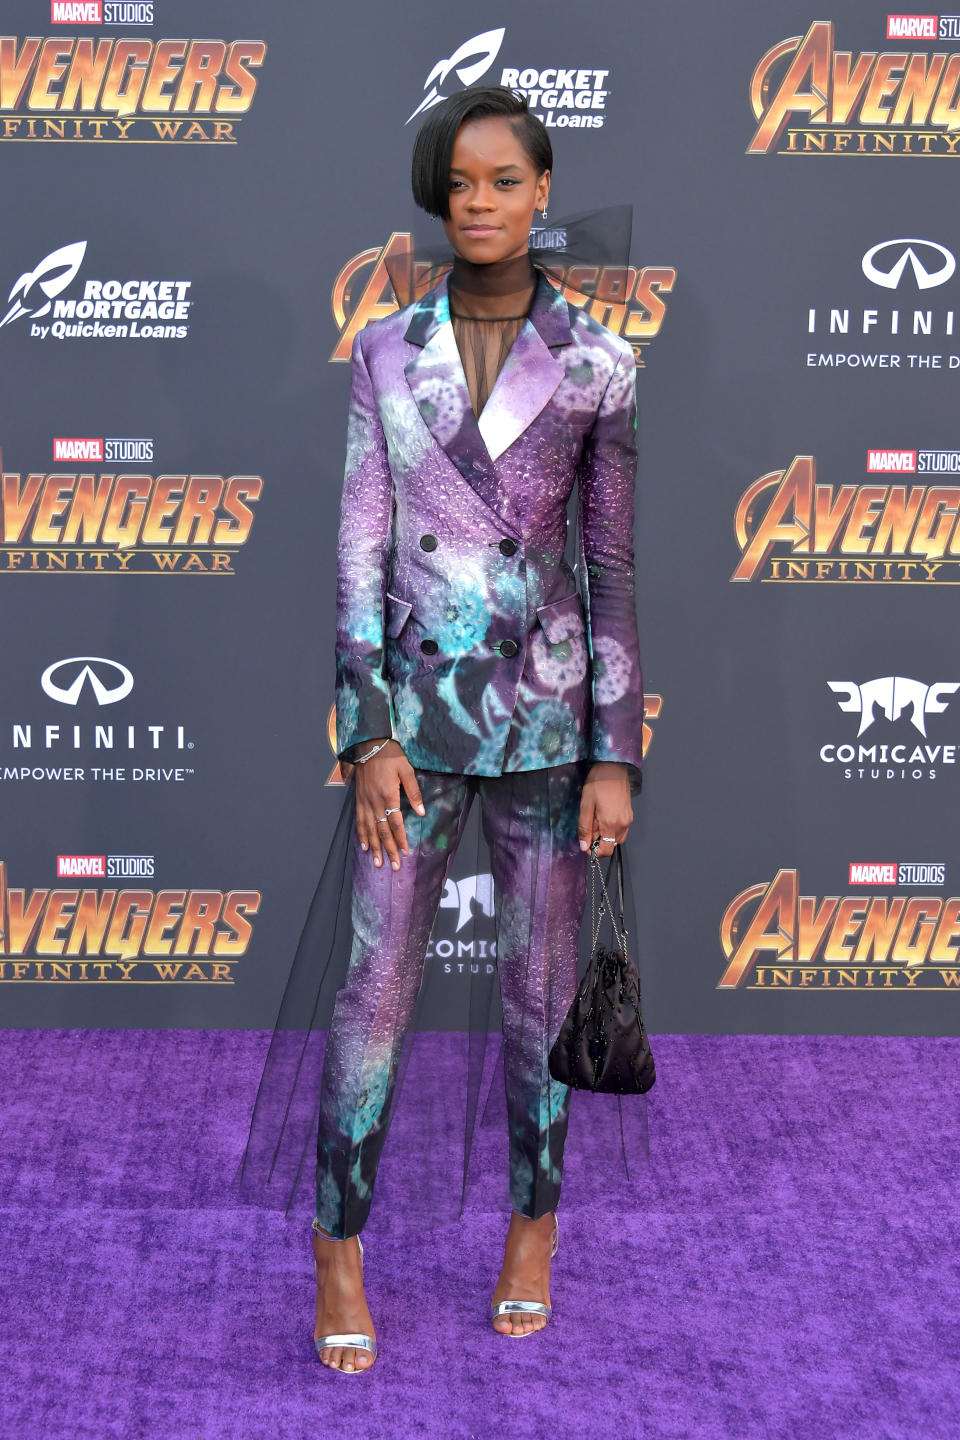 Letitia Wright at the LA premiere of ‘Avengers: Infinity War’